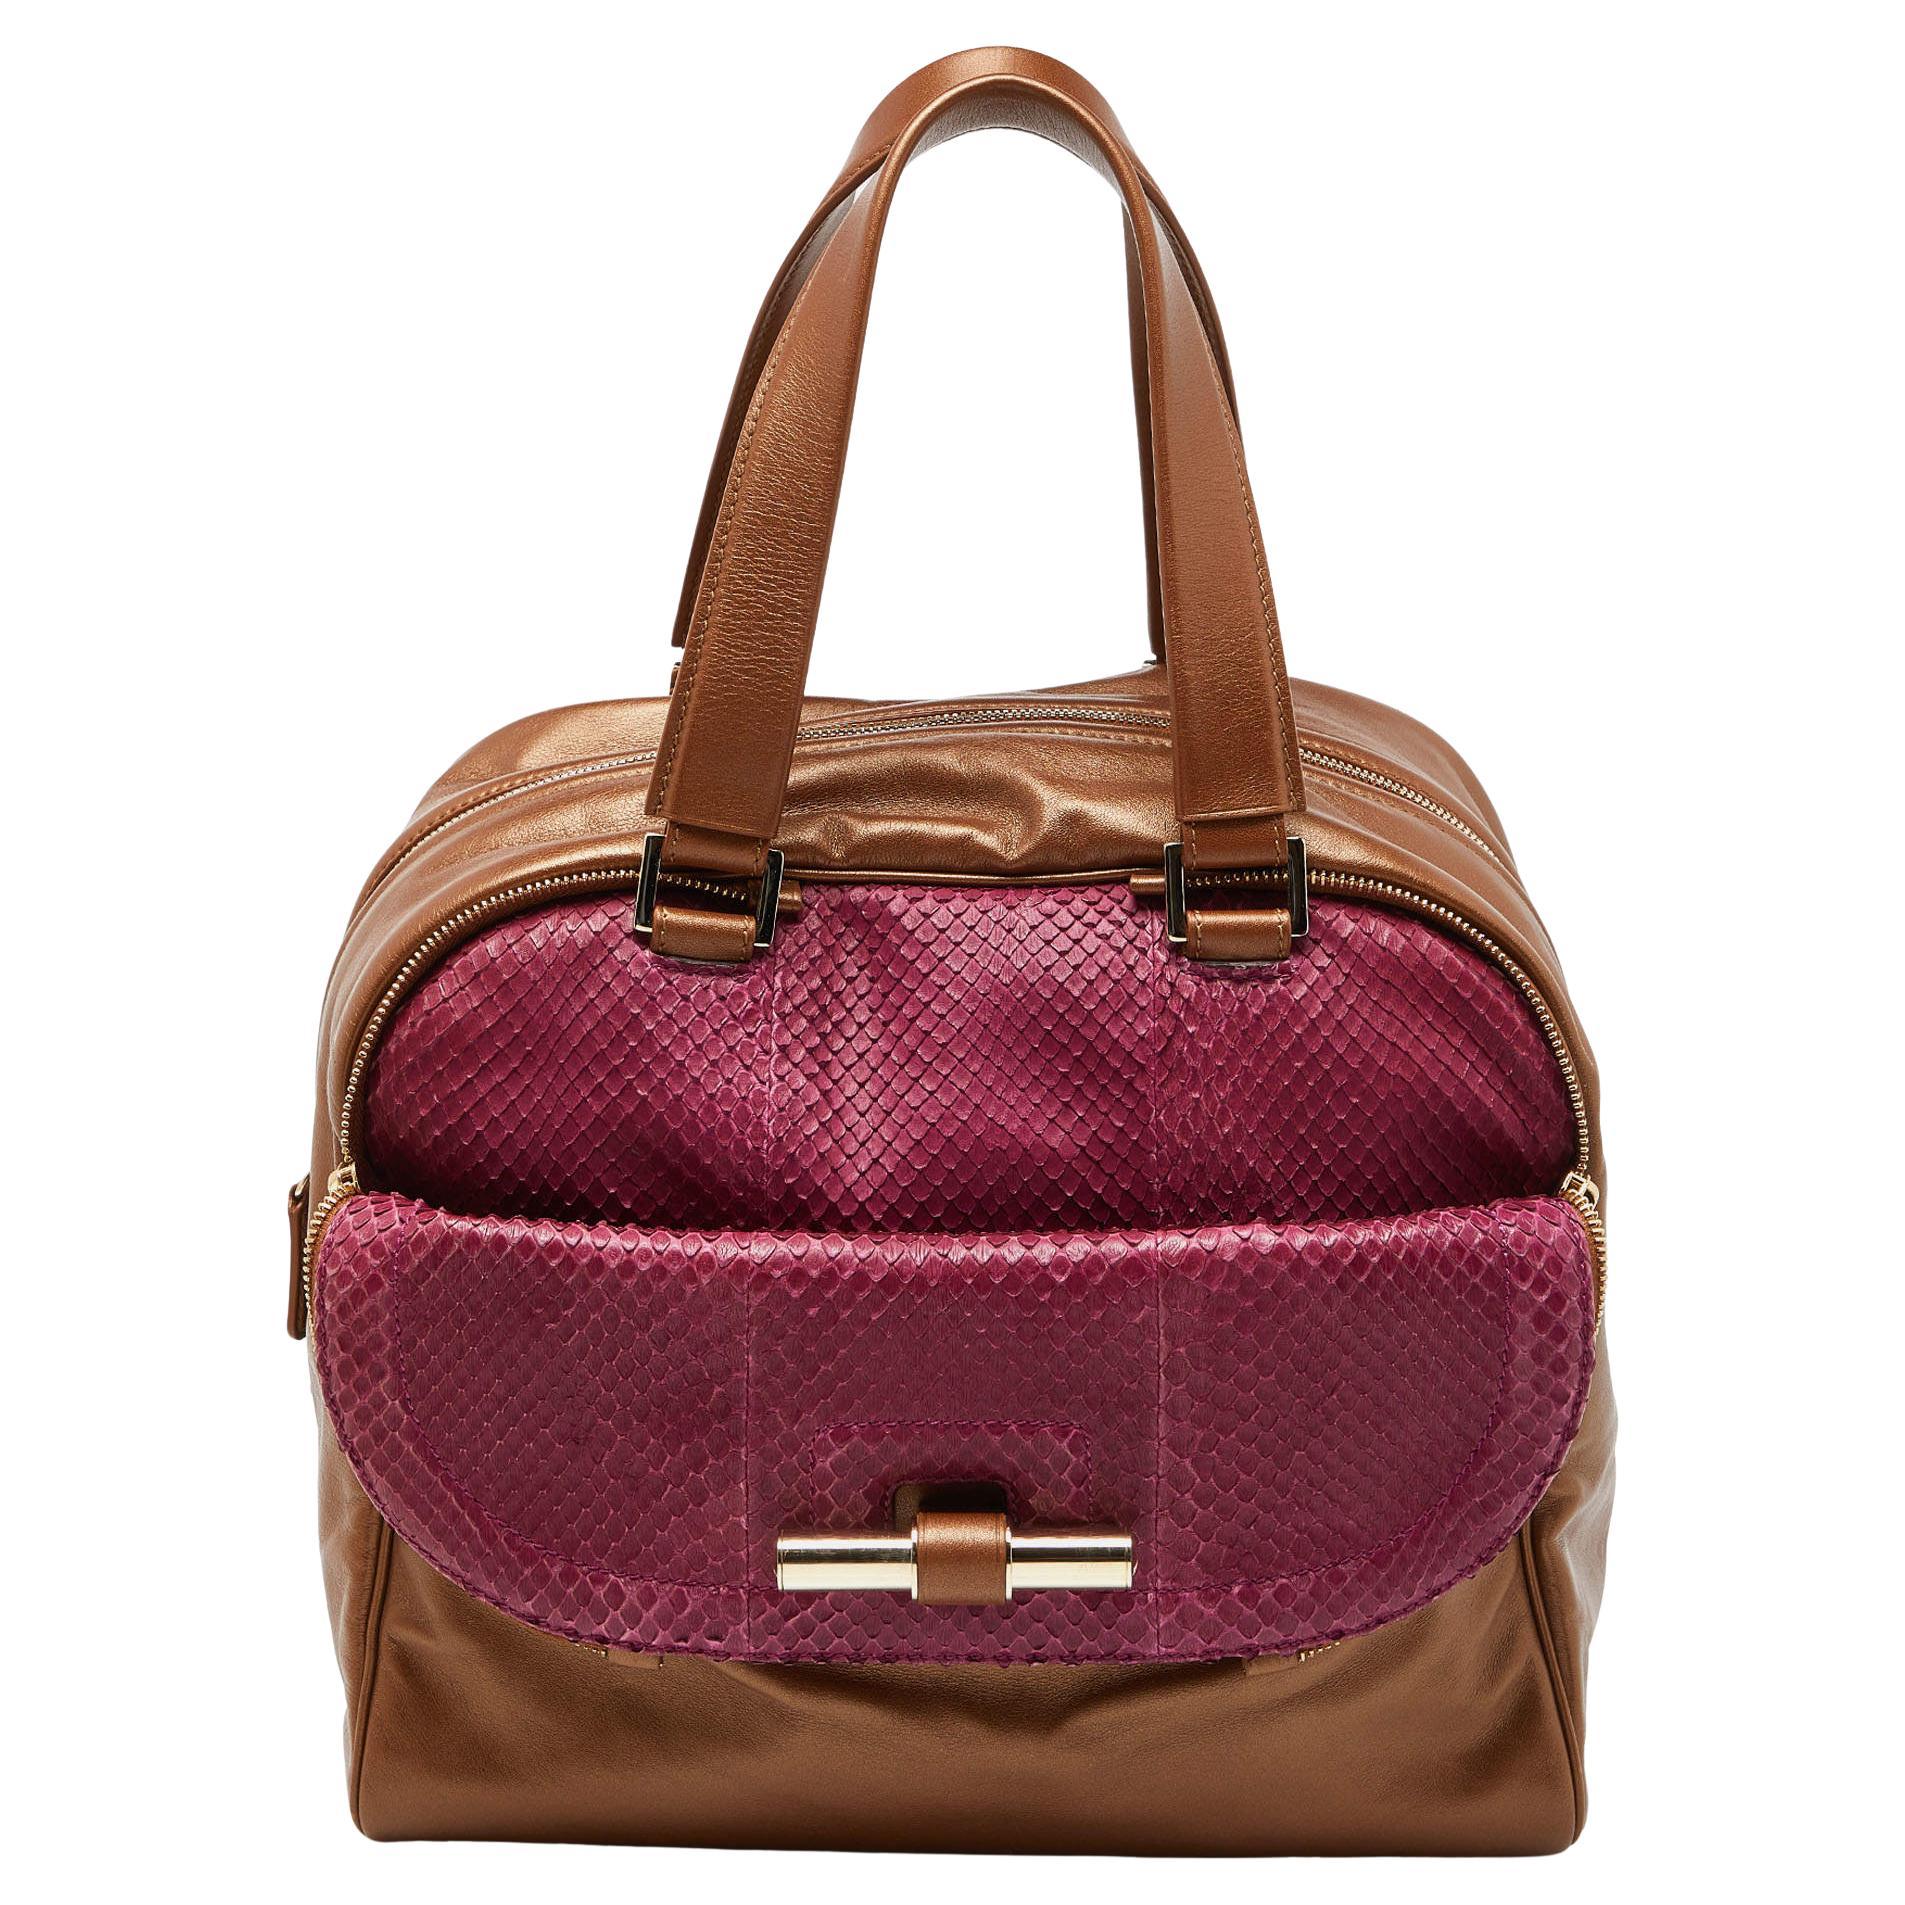 Jimmy Choo Brown/Magenta Leather and Watersnake Leather Justine Satchel For Sale